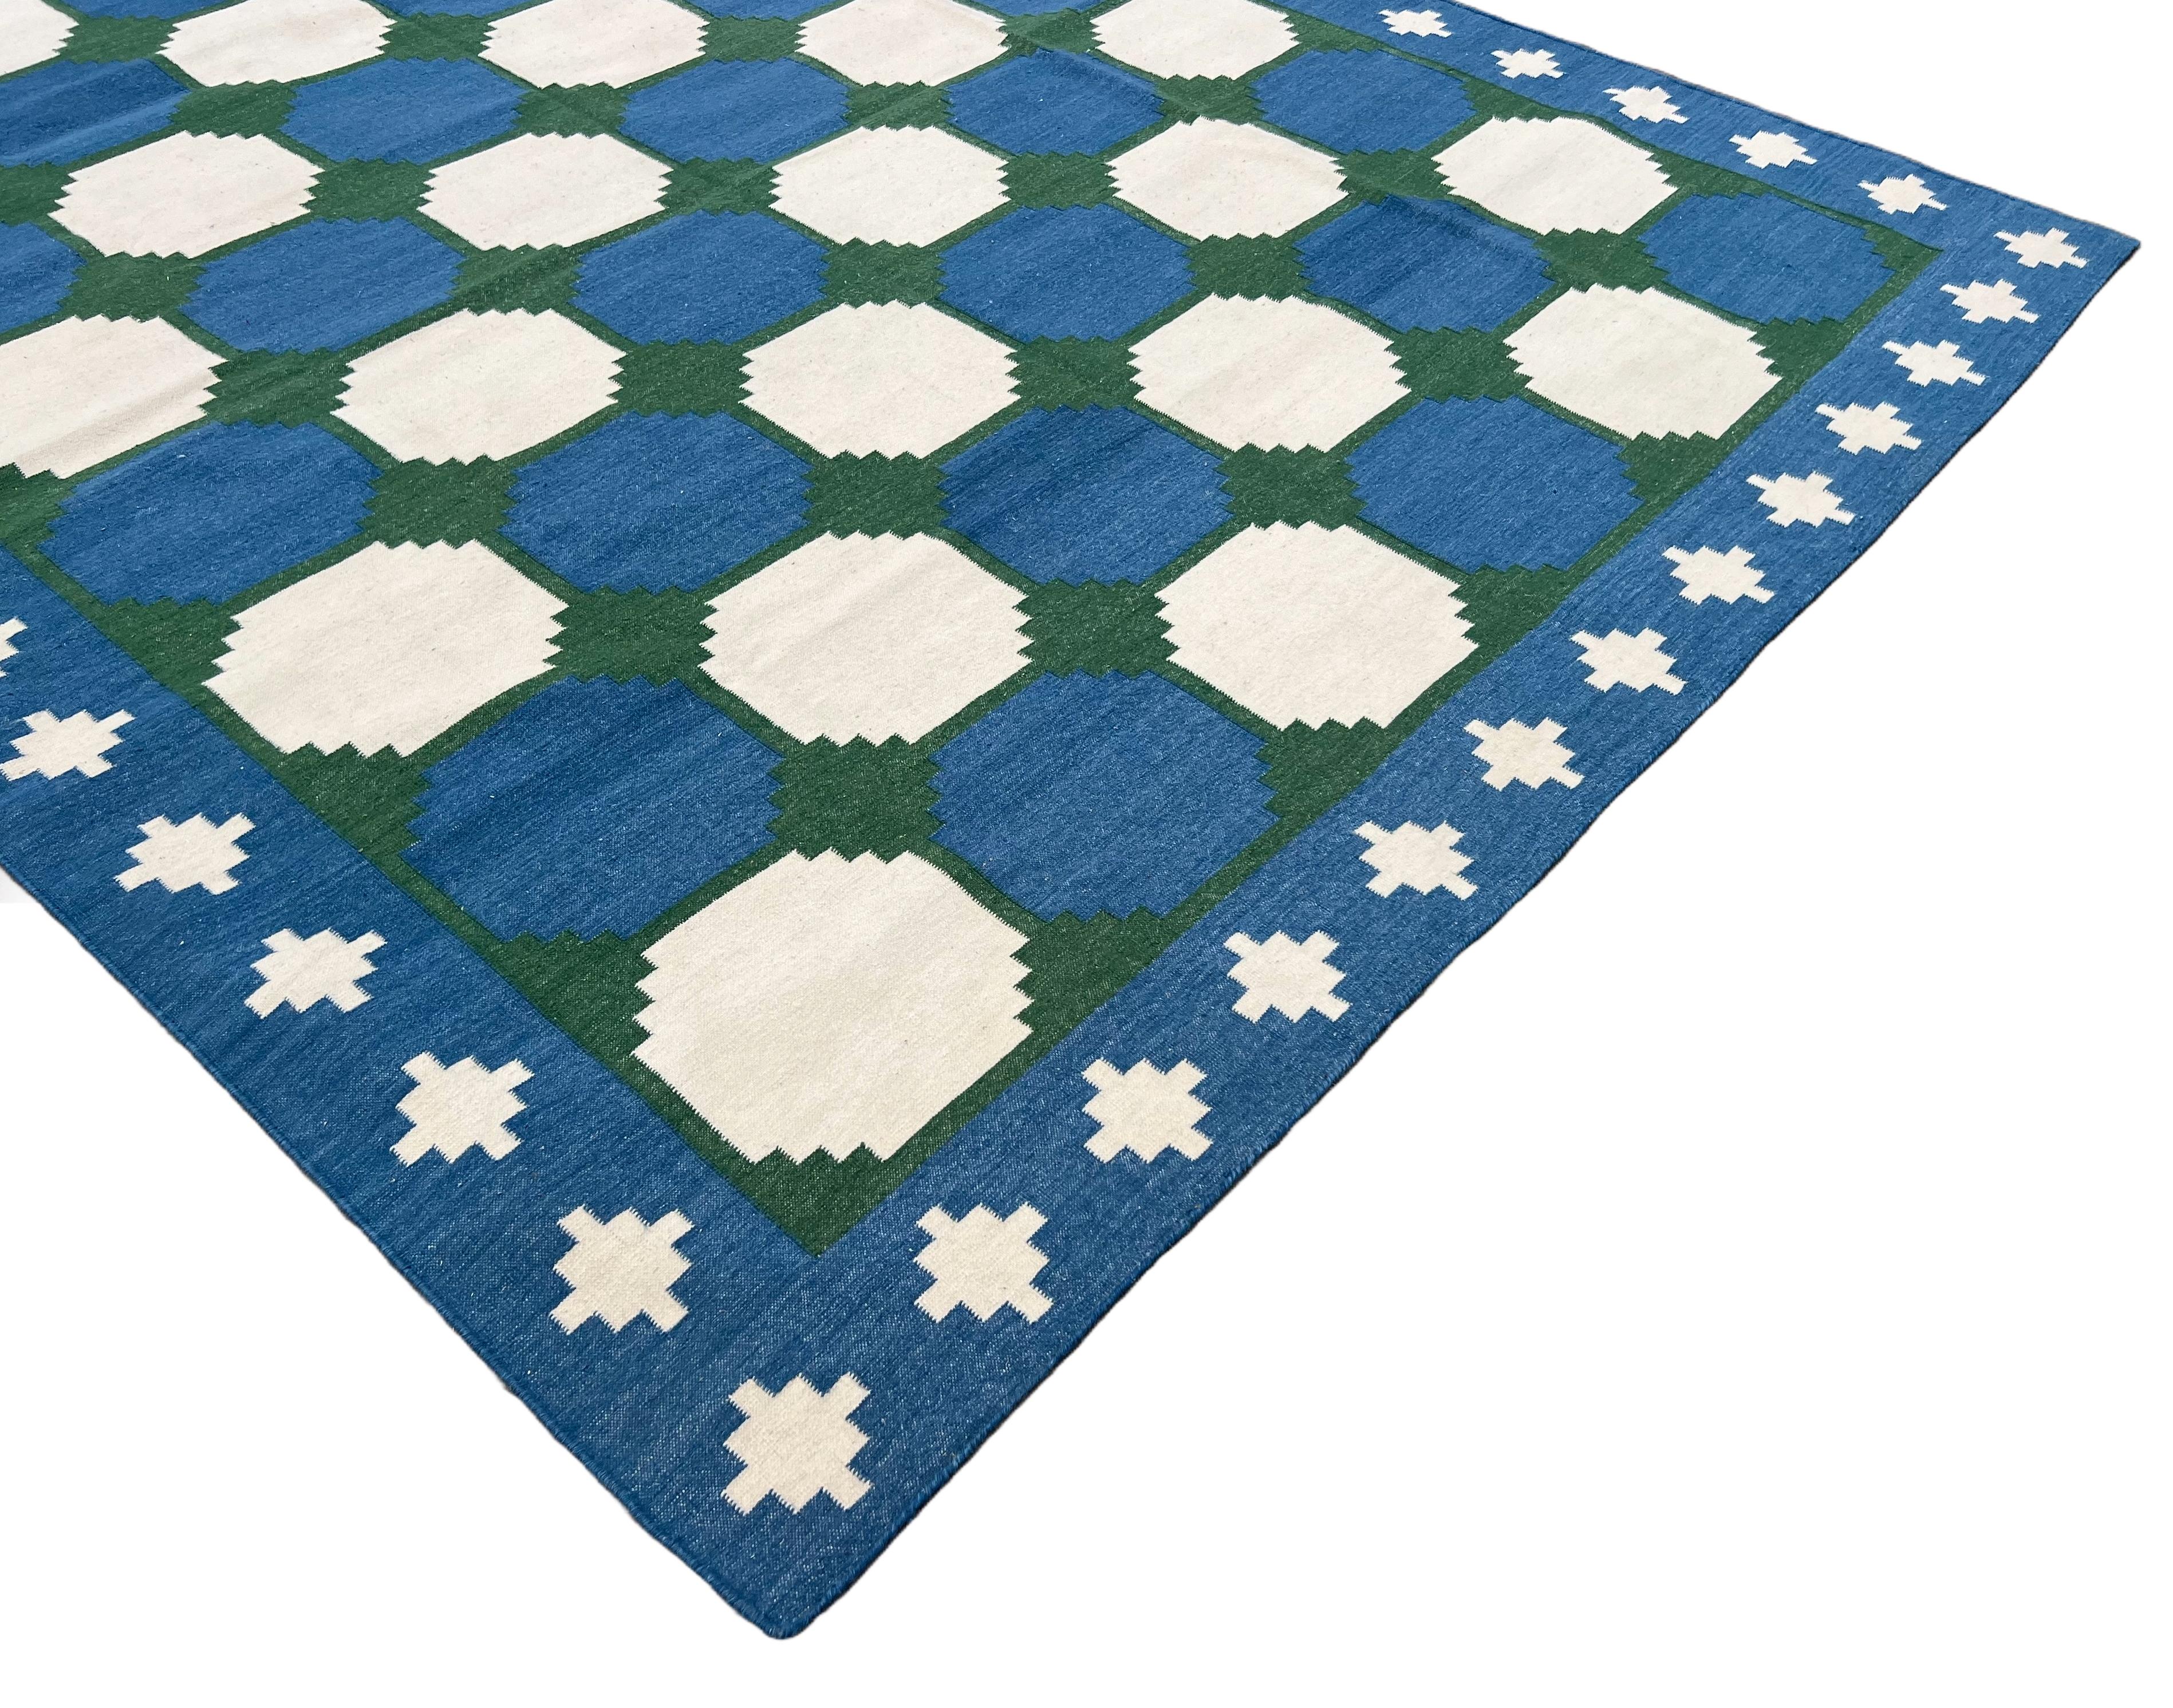 Handmade Woolen Area Flat Weave Rug, 8x10 Blue And Green Tile Patterned Dhurrie For Sale 2